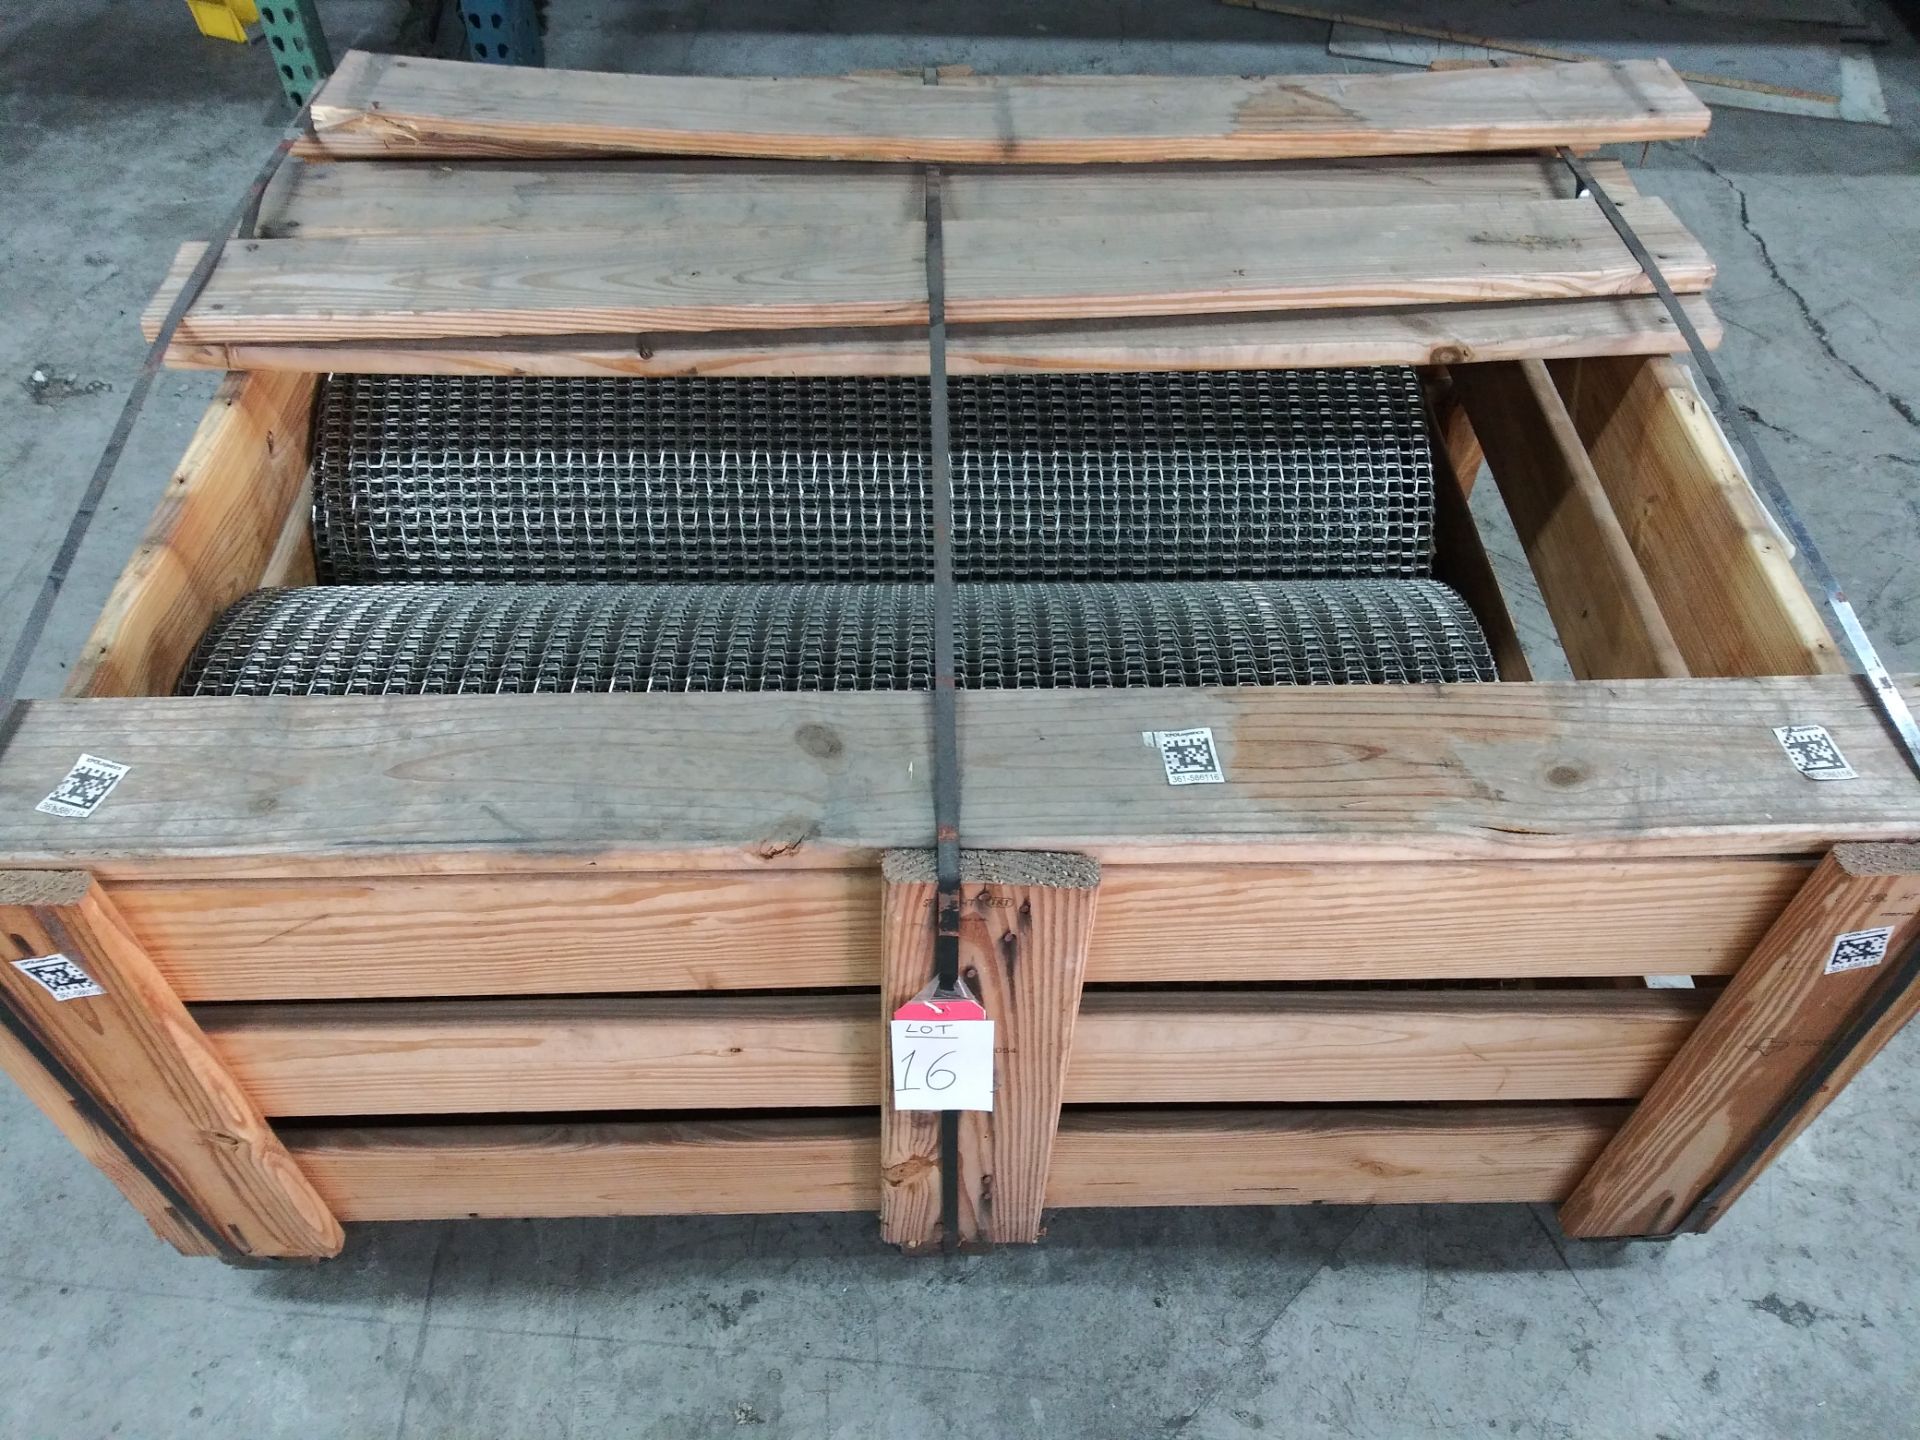 Pair of New Cambridge 50' X 40" Wide Stainless Steel Mesh Conveyor Chain